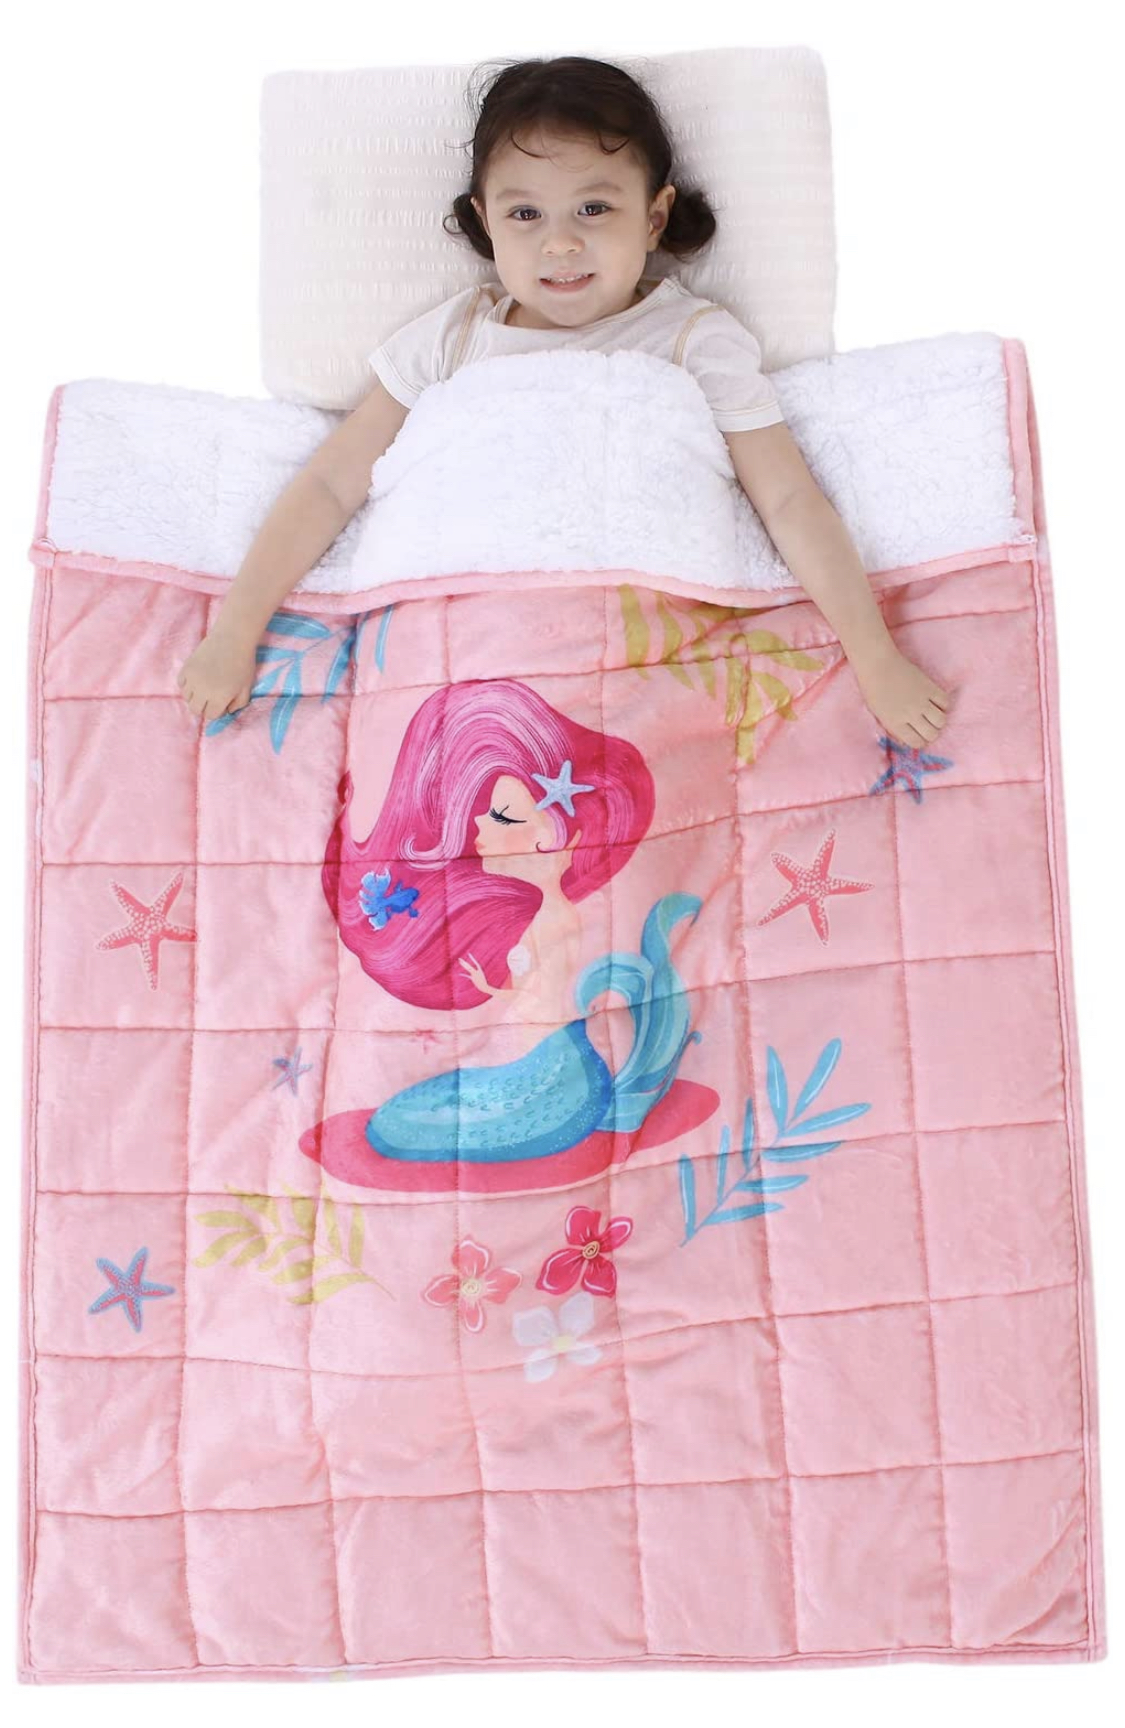 3lb Weighted Blanket For Kids $19.99(Reg.$39.99) | Free Tastes Good!